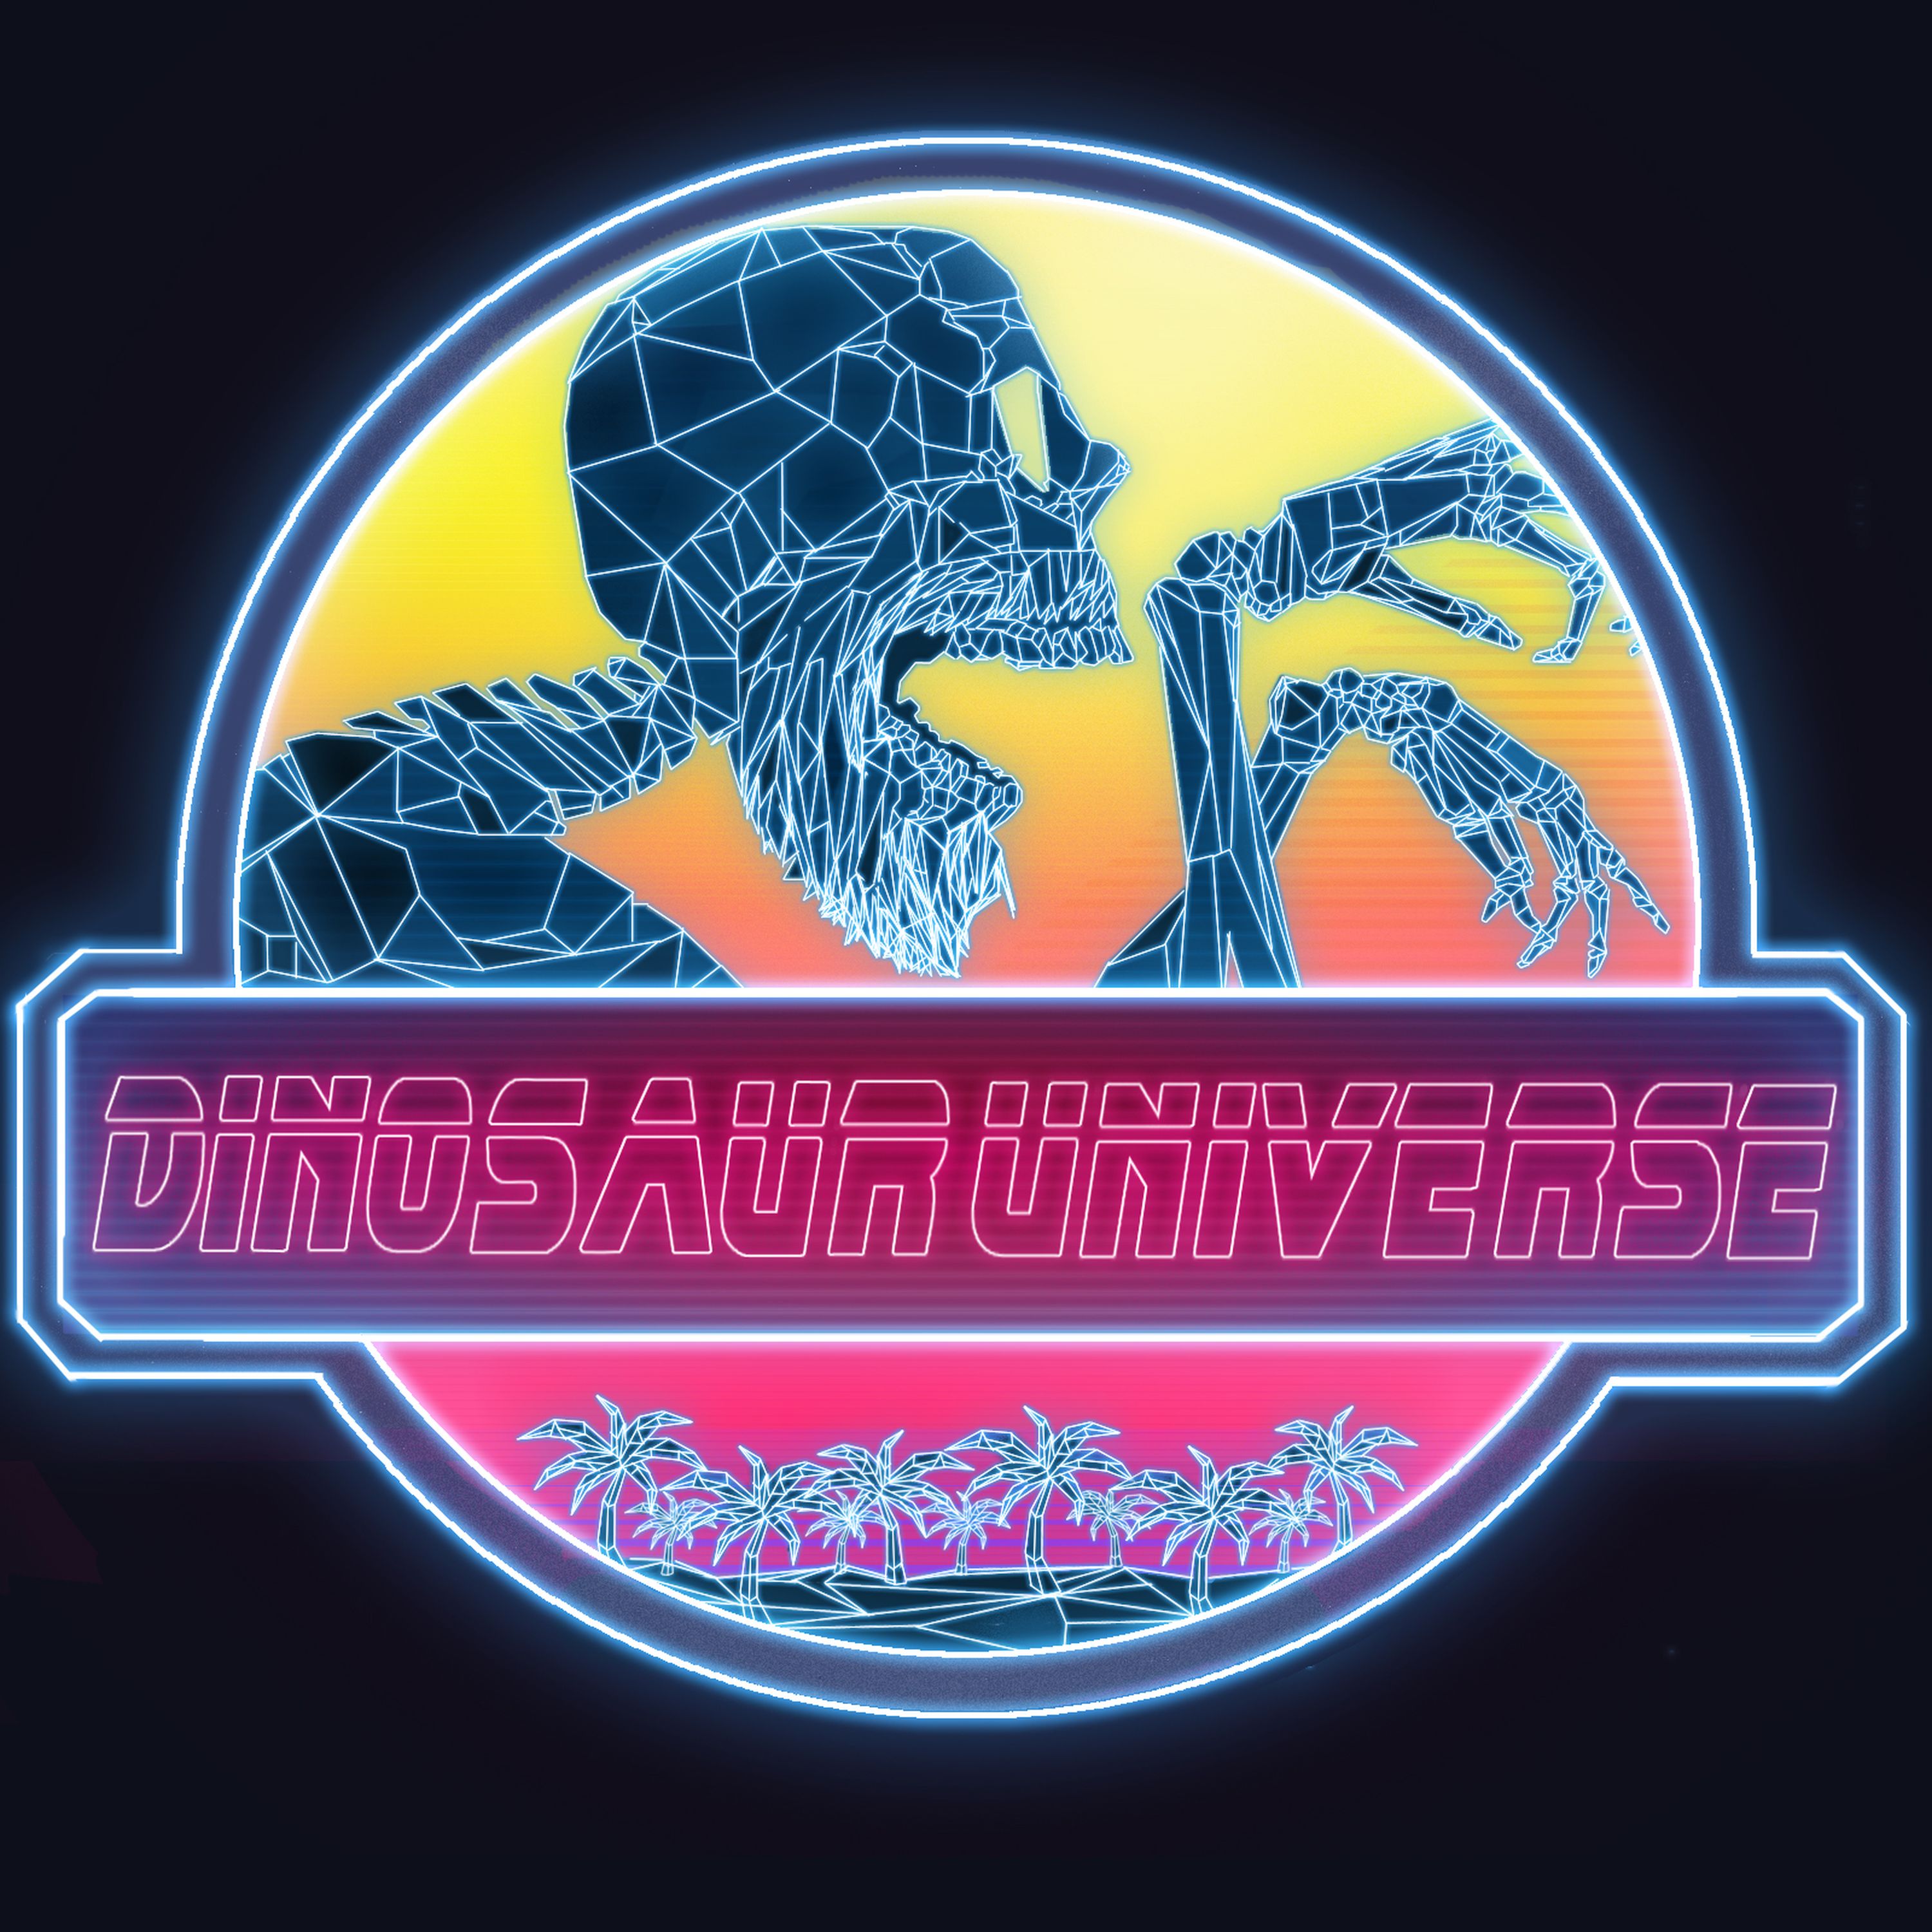 Dinosaur Universe #14 How To Achieve Enlightenment and Gain New Friends